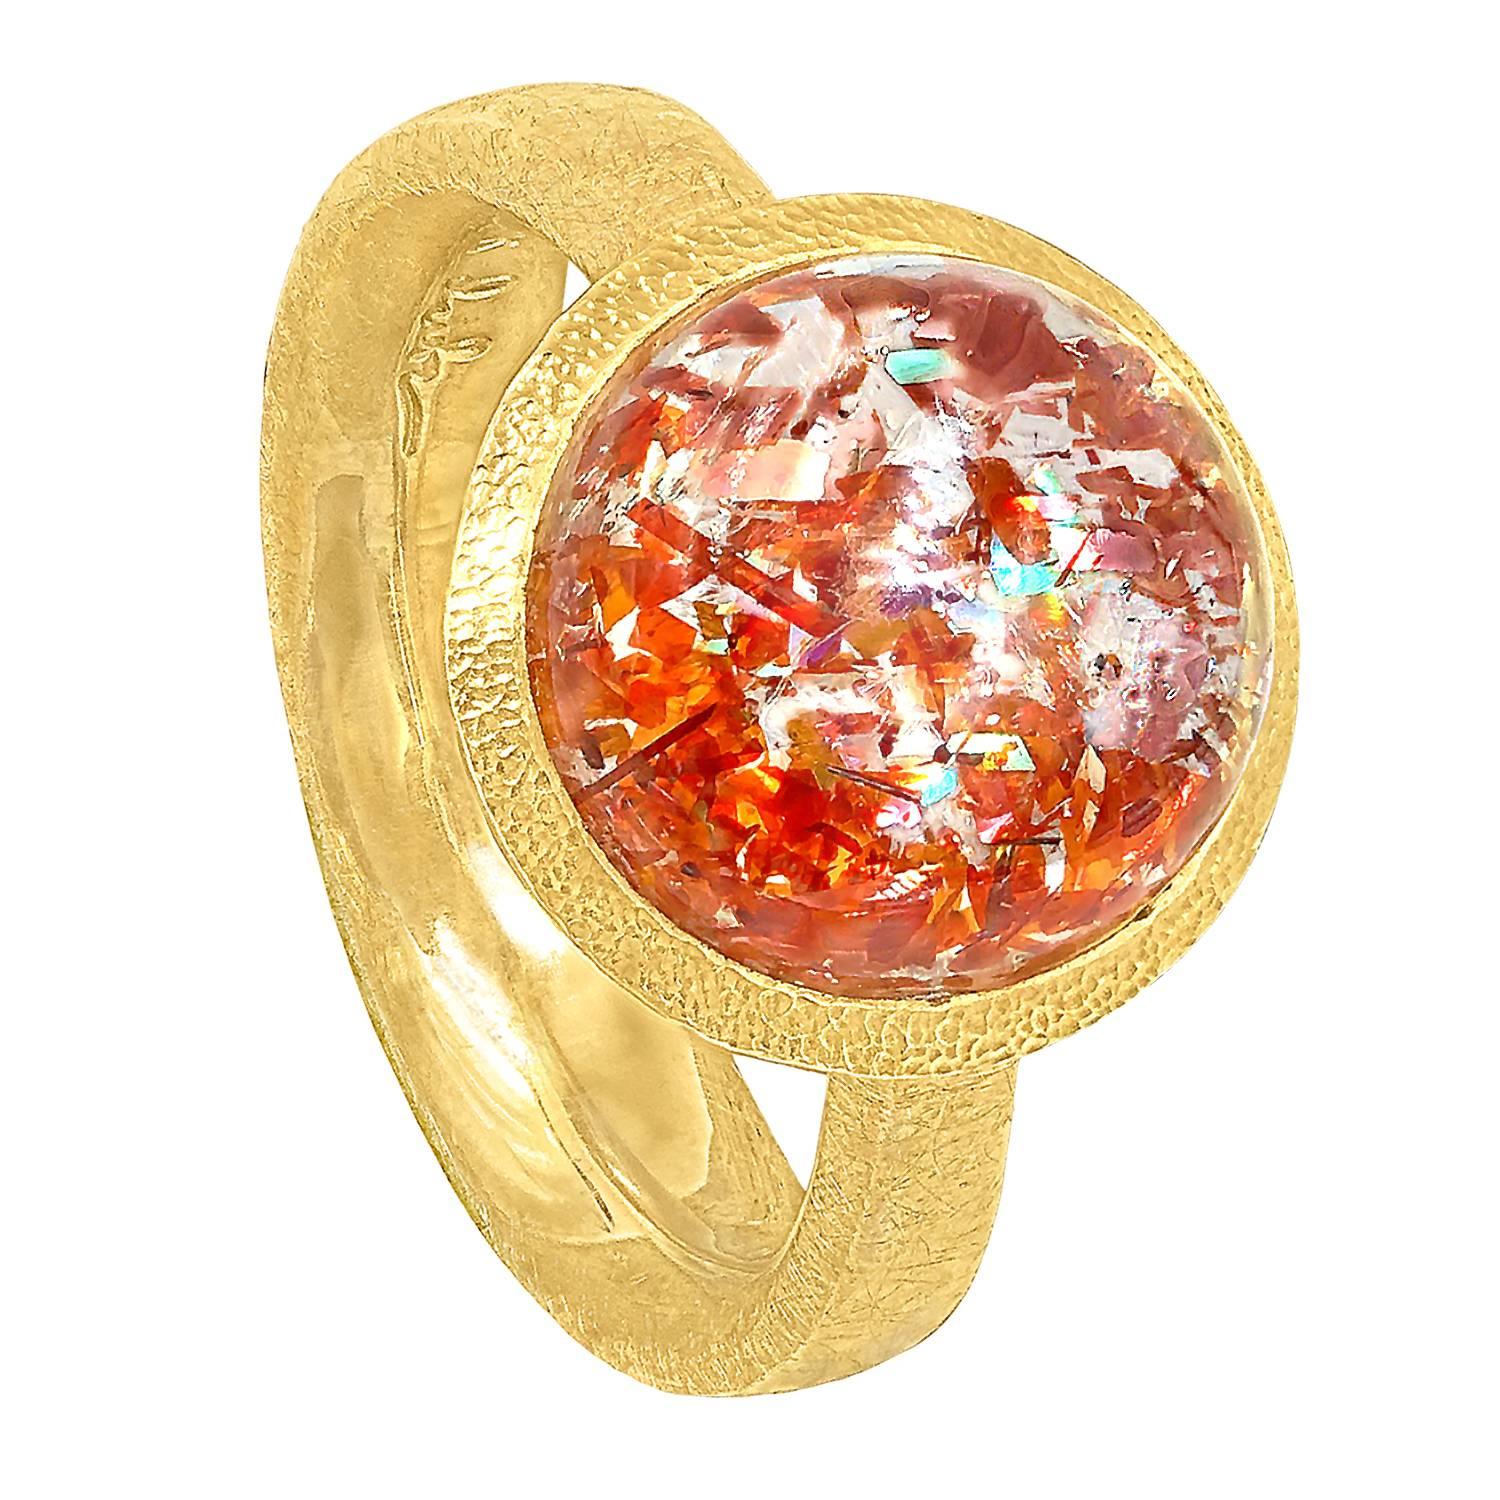 Devta Doolan Prized Natural Rainbow Sunstone One of a Kind Gold Ring